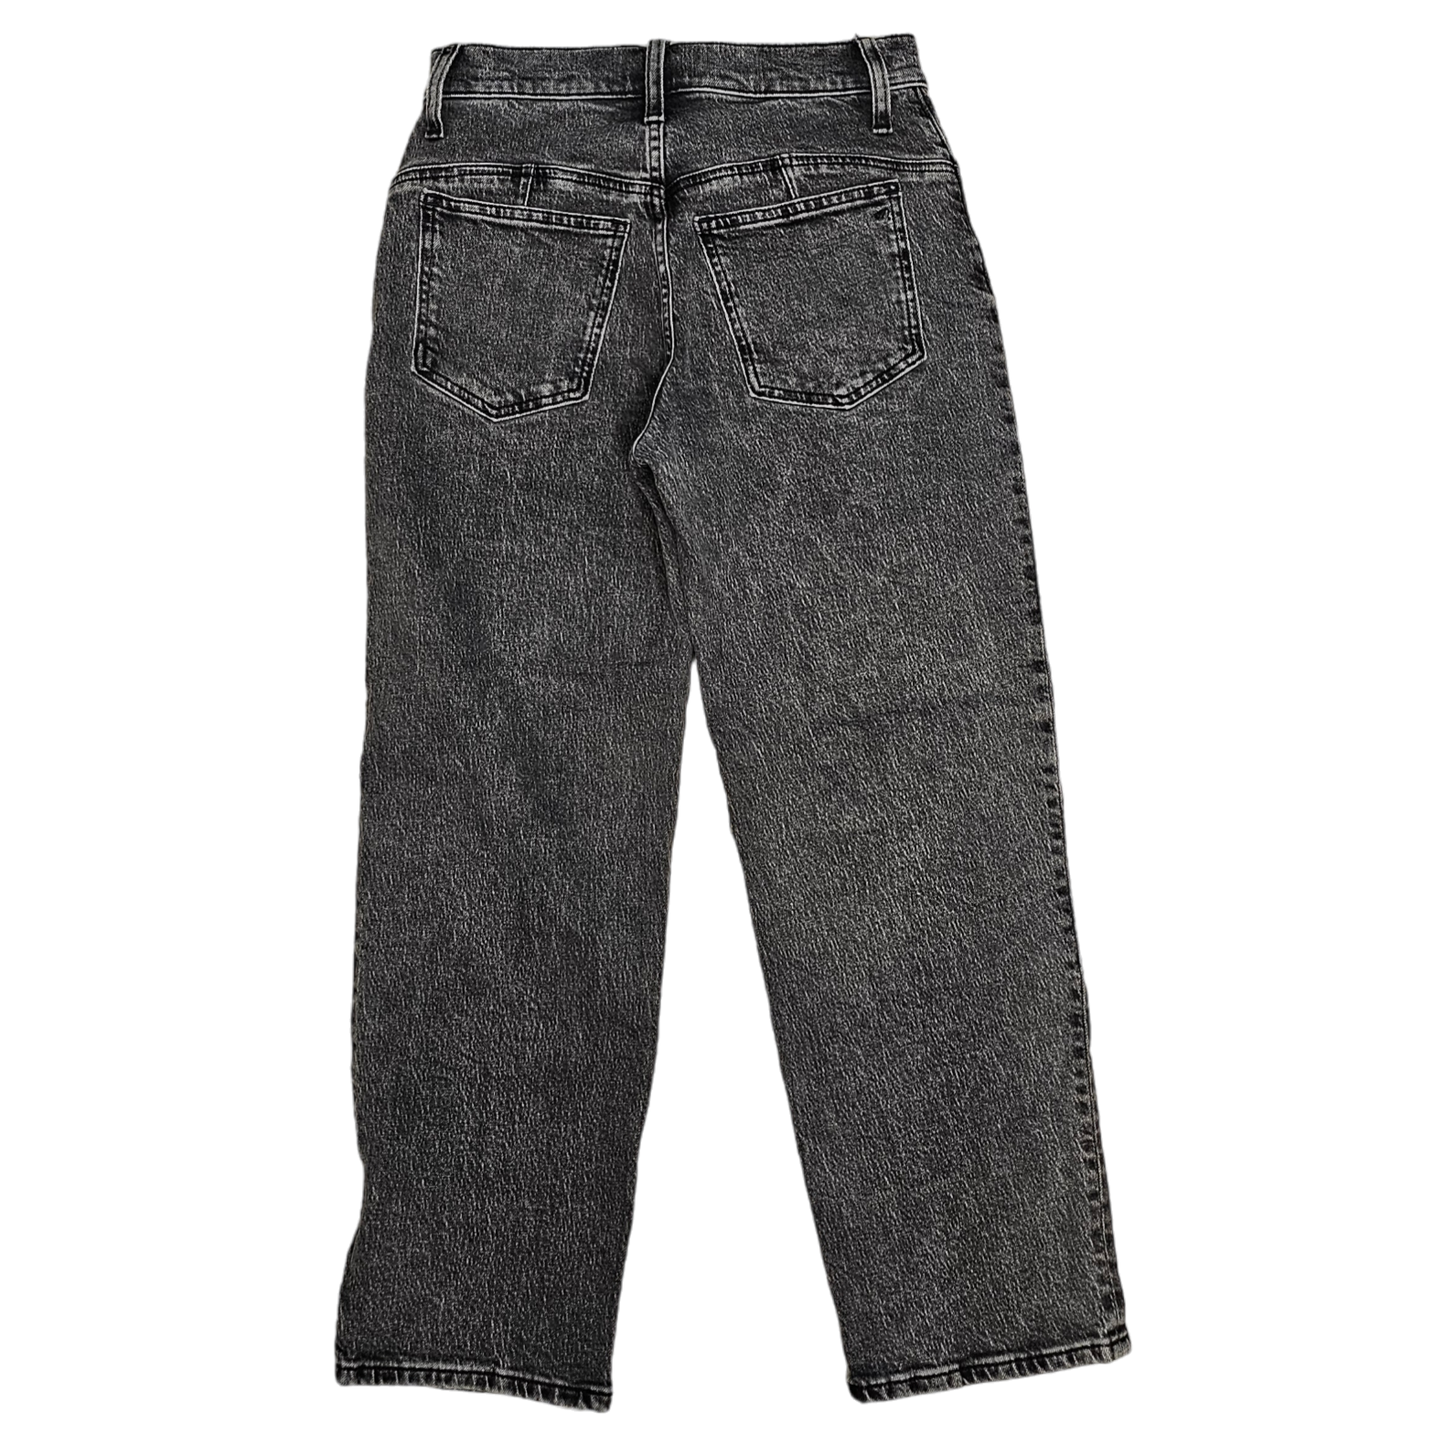 Jeans Straight By Madewell  Size: 2